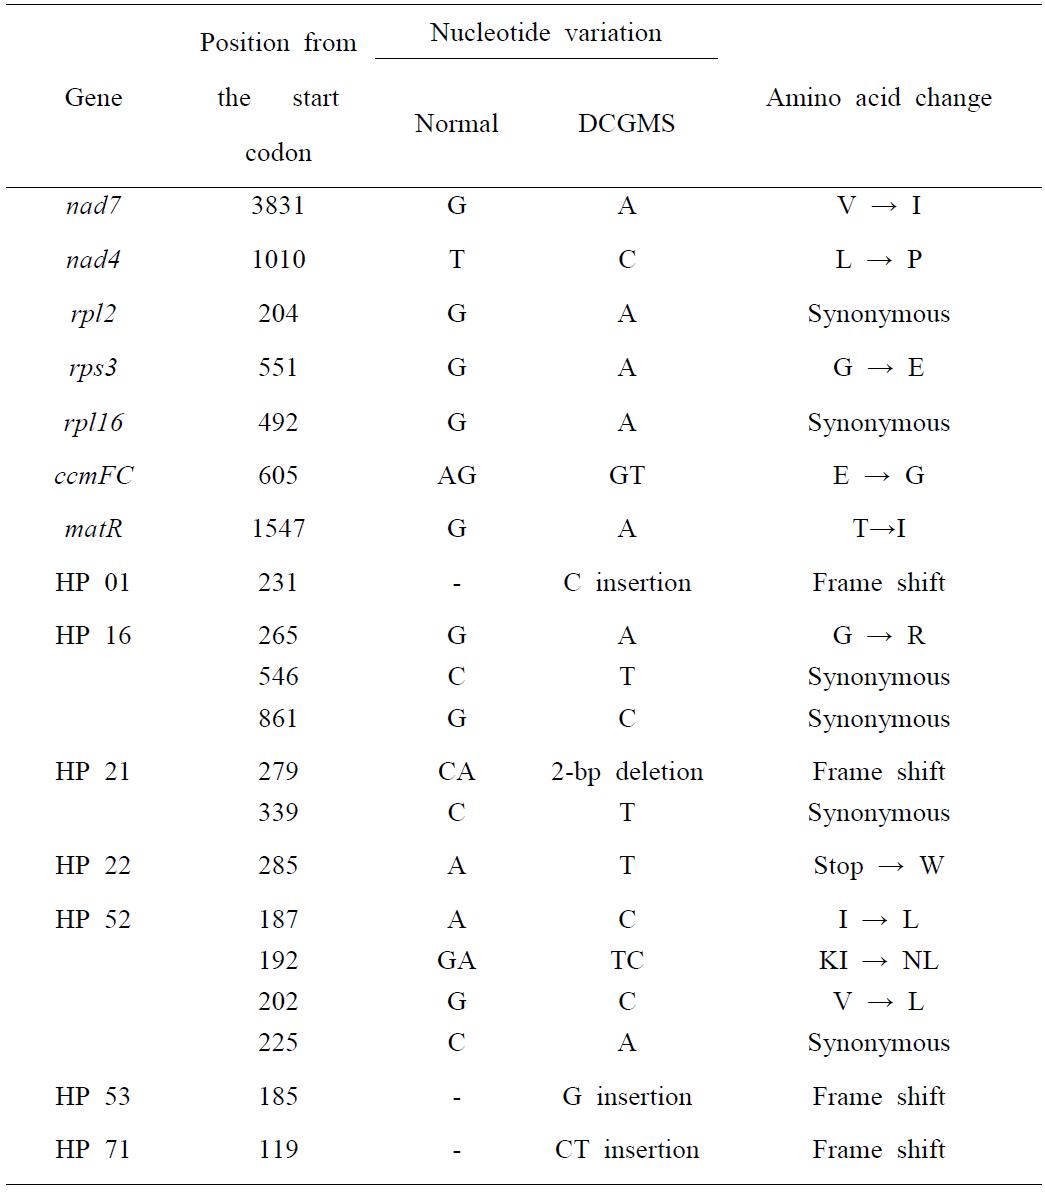 Sequence variations of mitochondrial genes coding for known and hypothetical proteins (HPs) between normal and DCGMS mitotypes